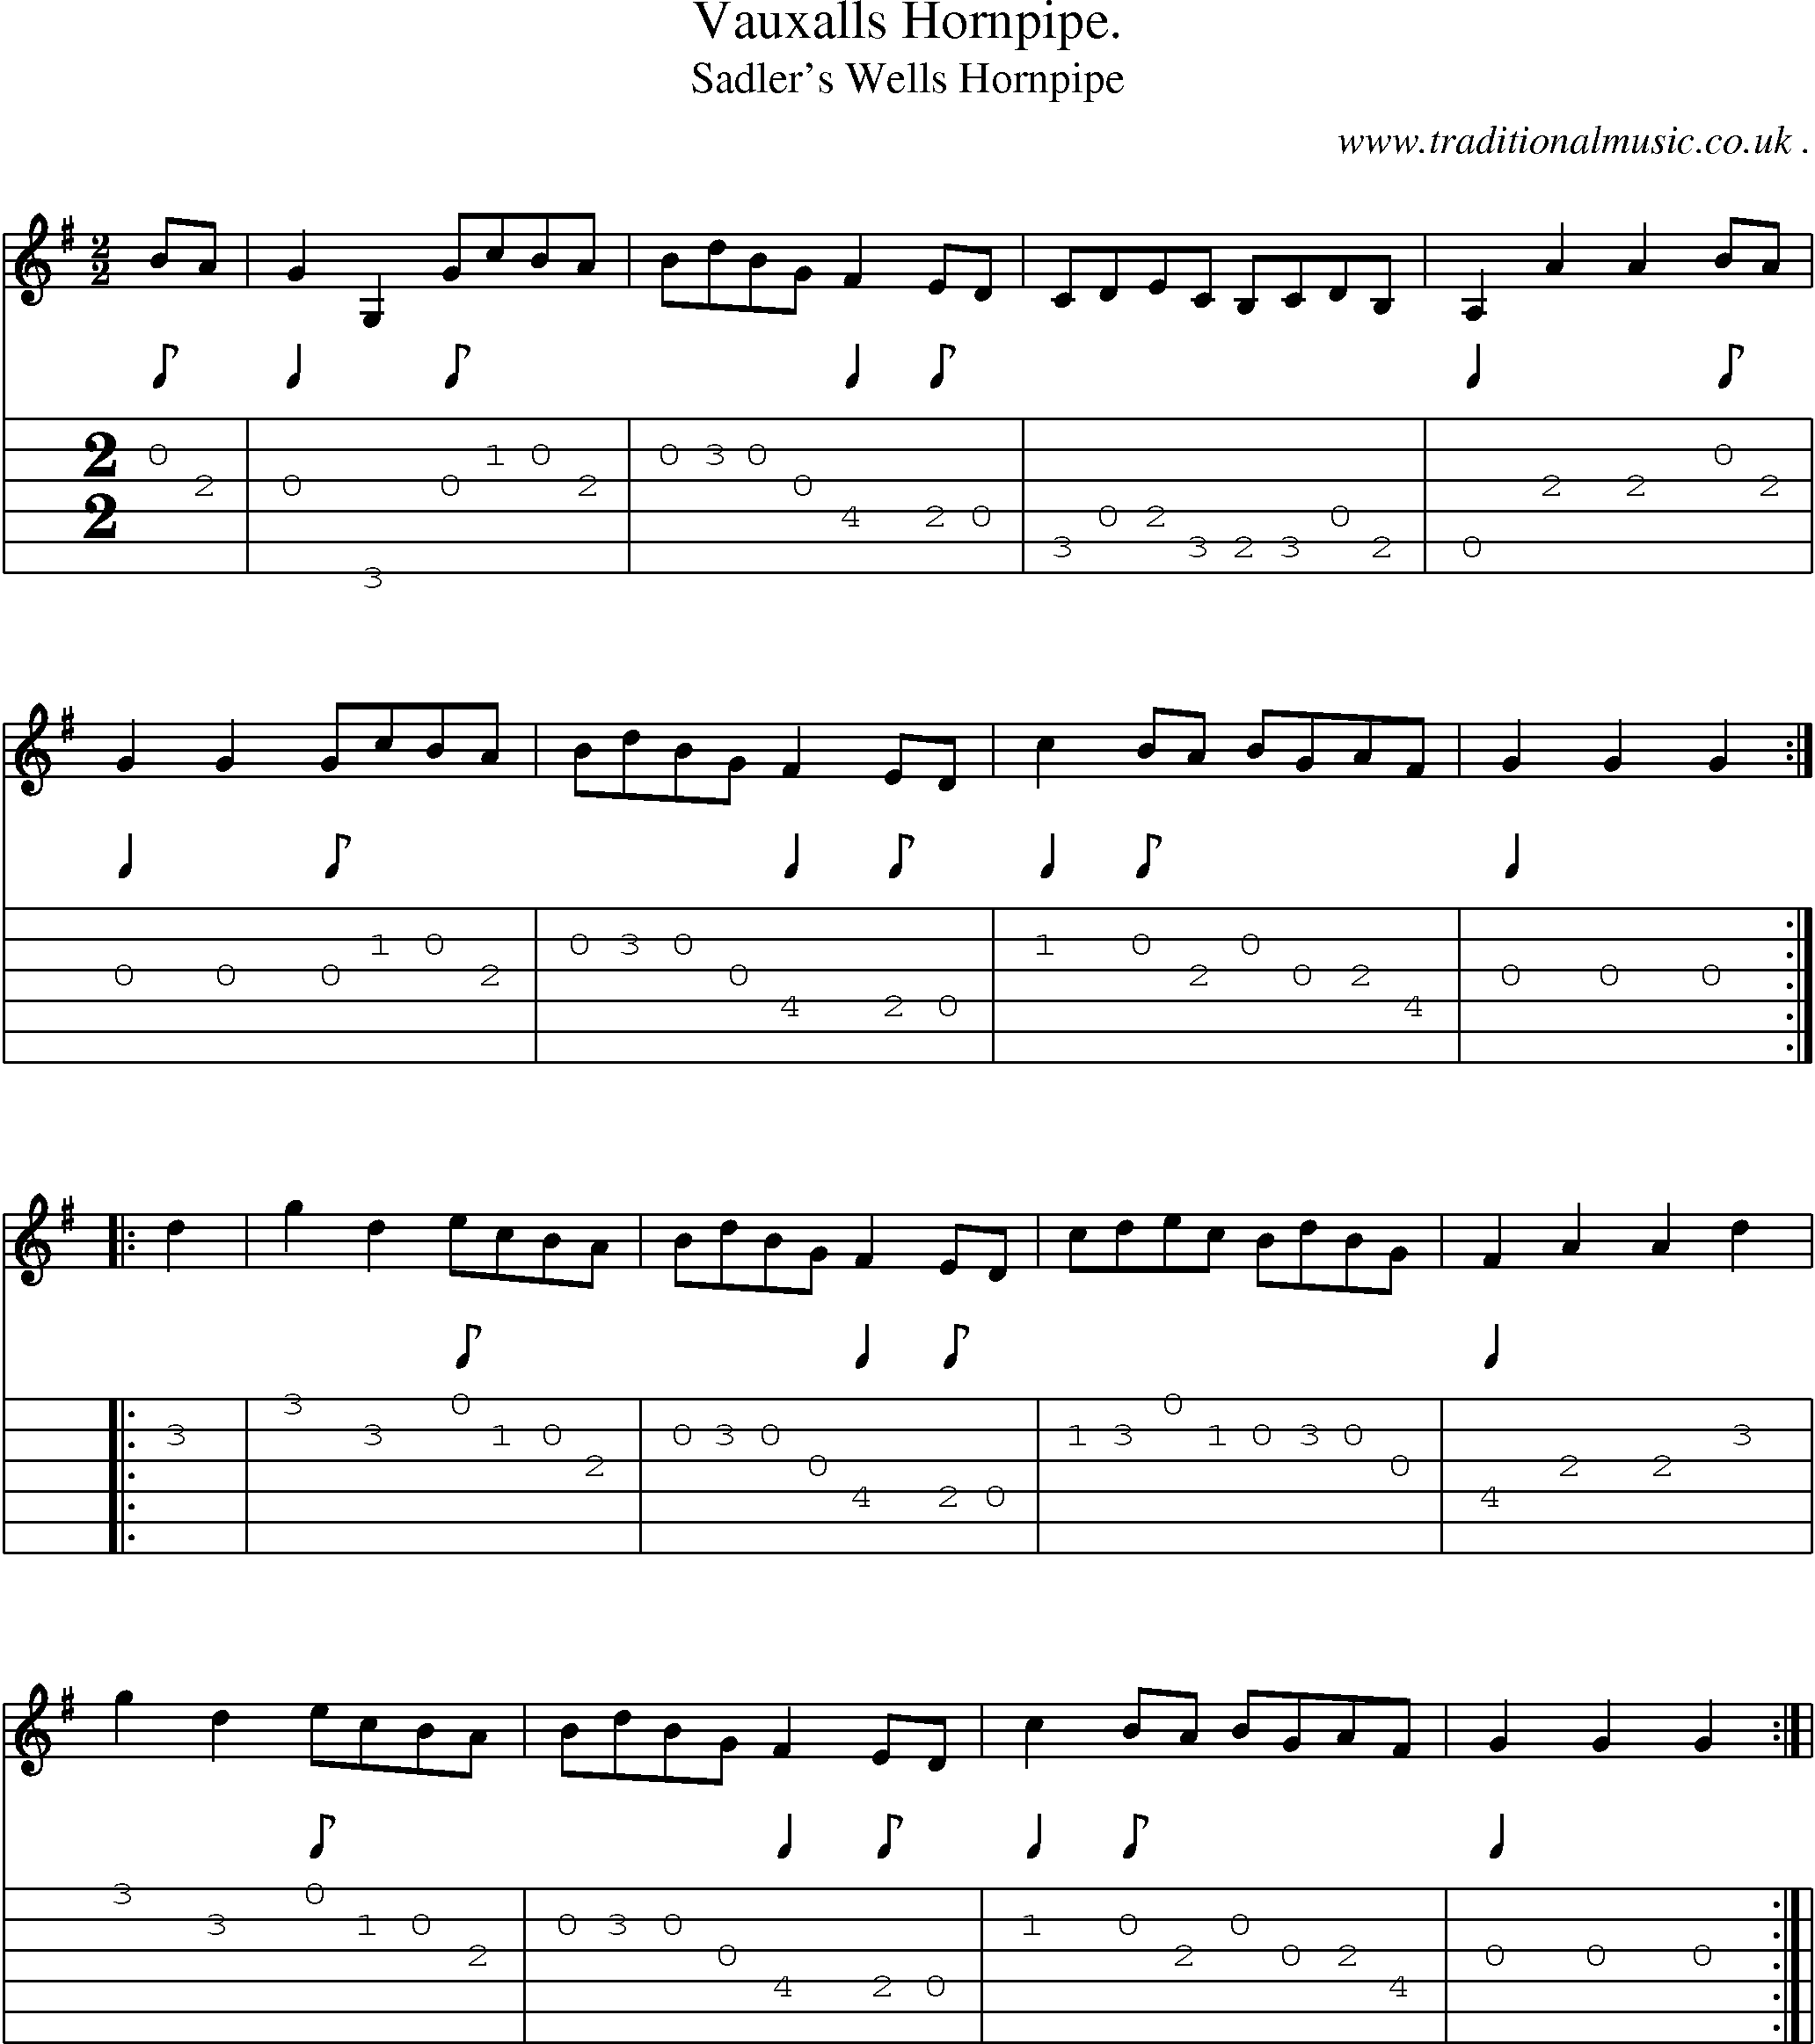 Sheet-Music and Guitar Tabs for Vauxalls Hornpipe